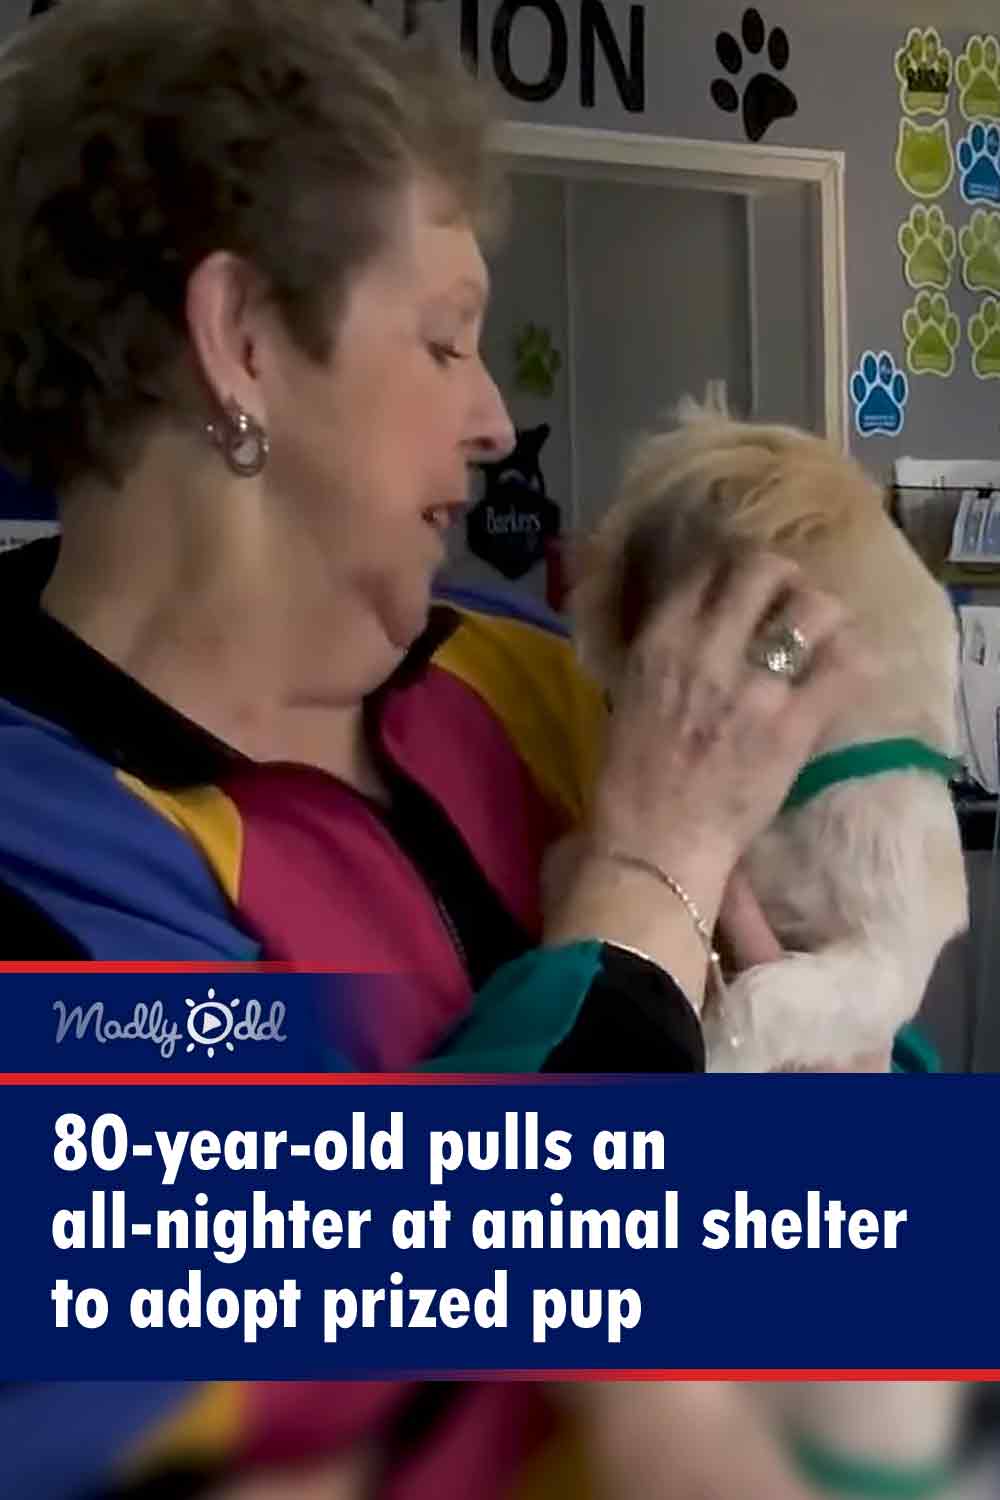 80-year-old pulls an all-nighter at animal shelter to adopt prized pup